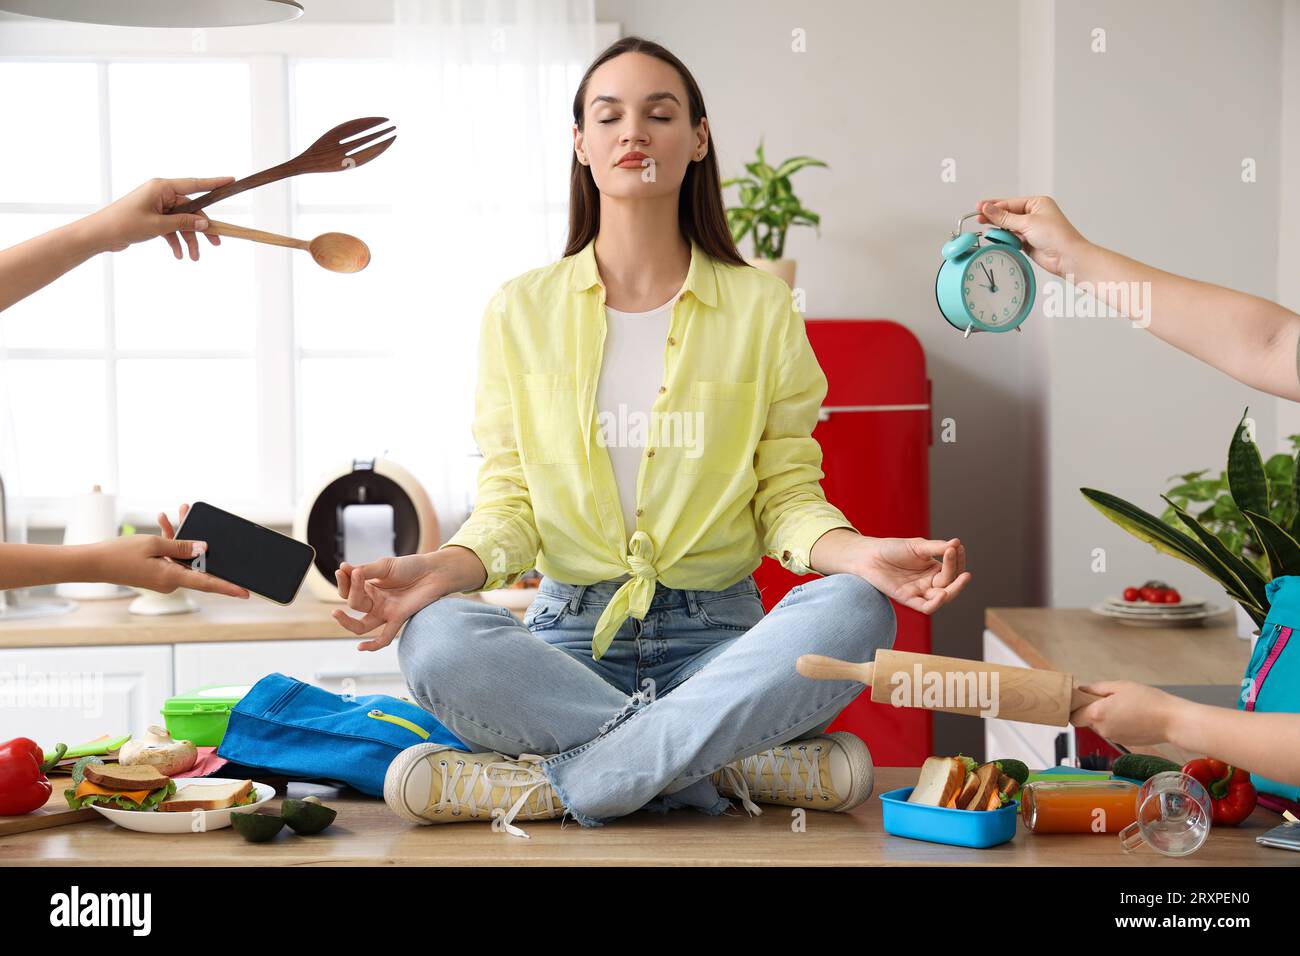 Young woman with a lot of things to do meditating in kitchen Stock Photo